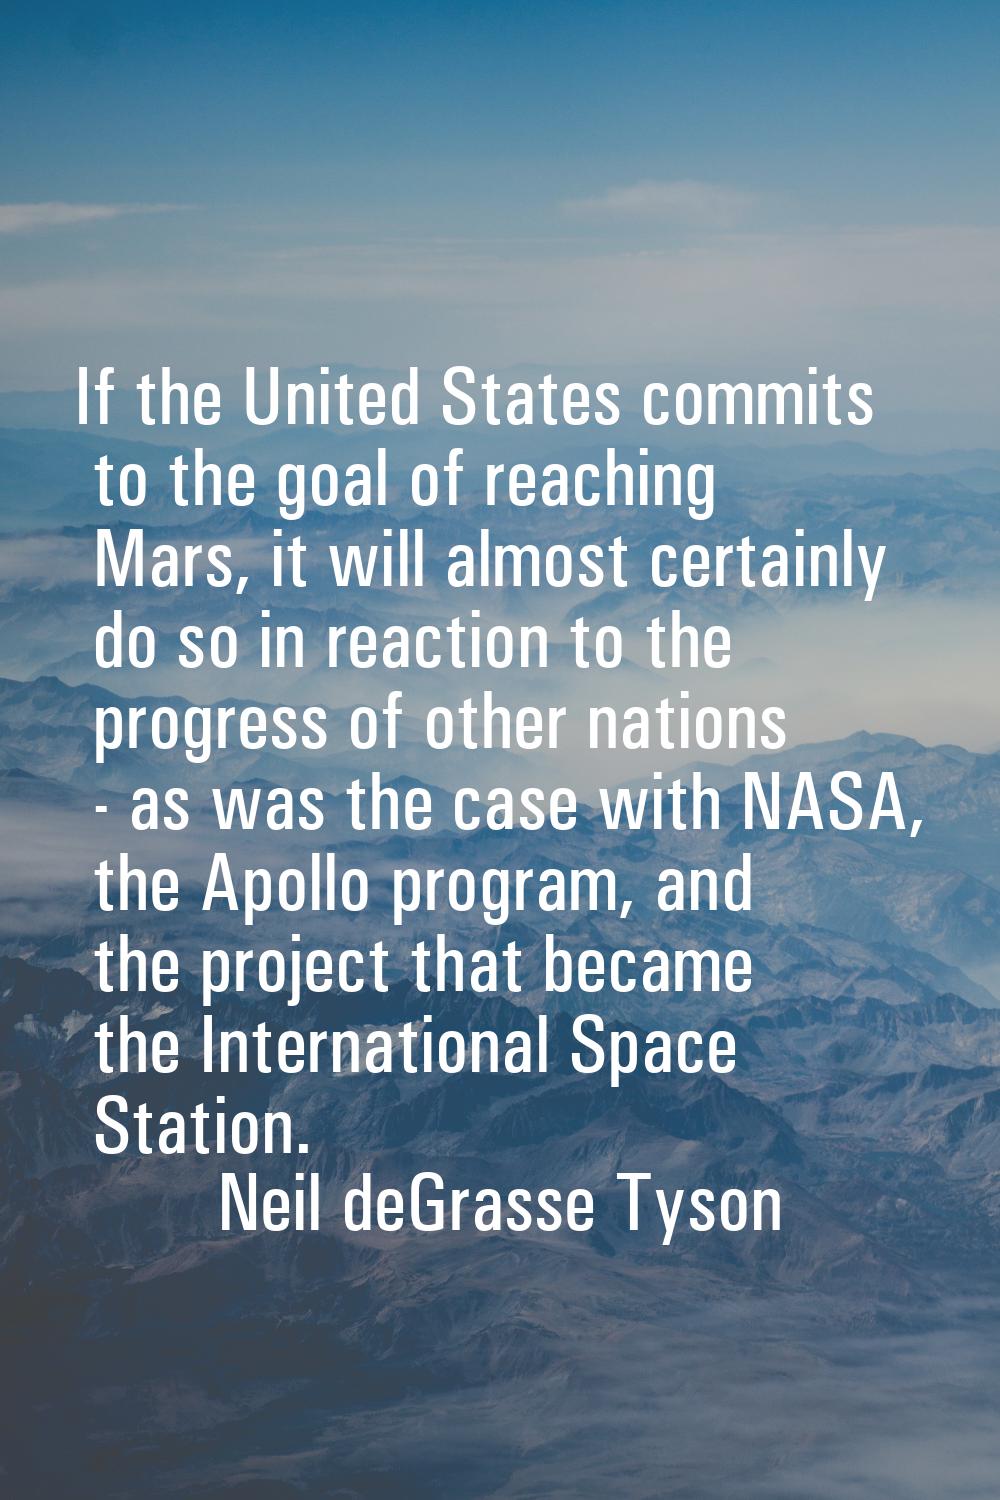 If the United States commits to the goal of reaching Mars, it will almost certainly do so in reacti